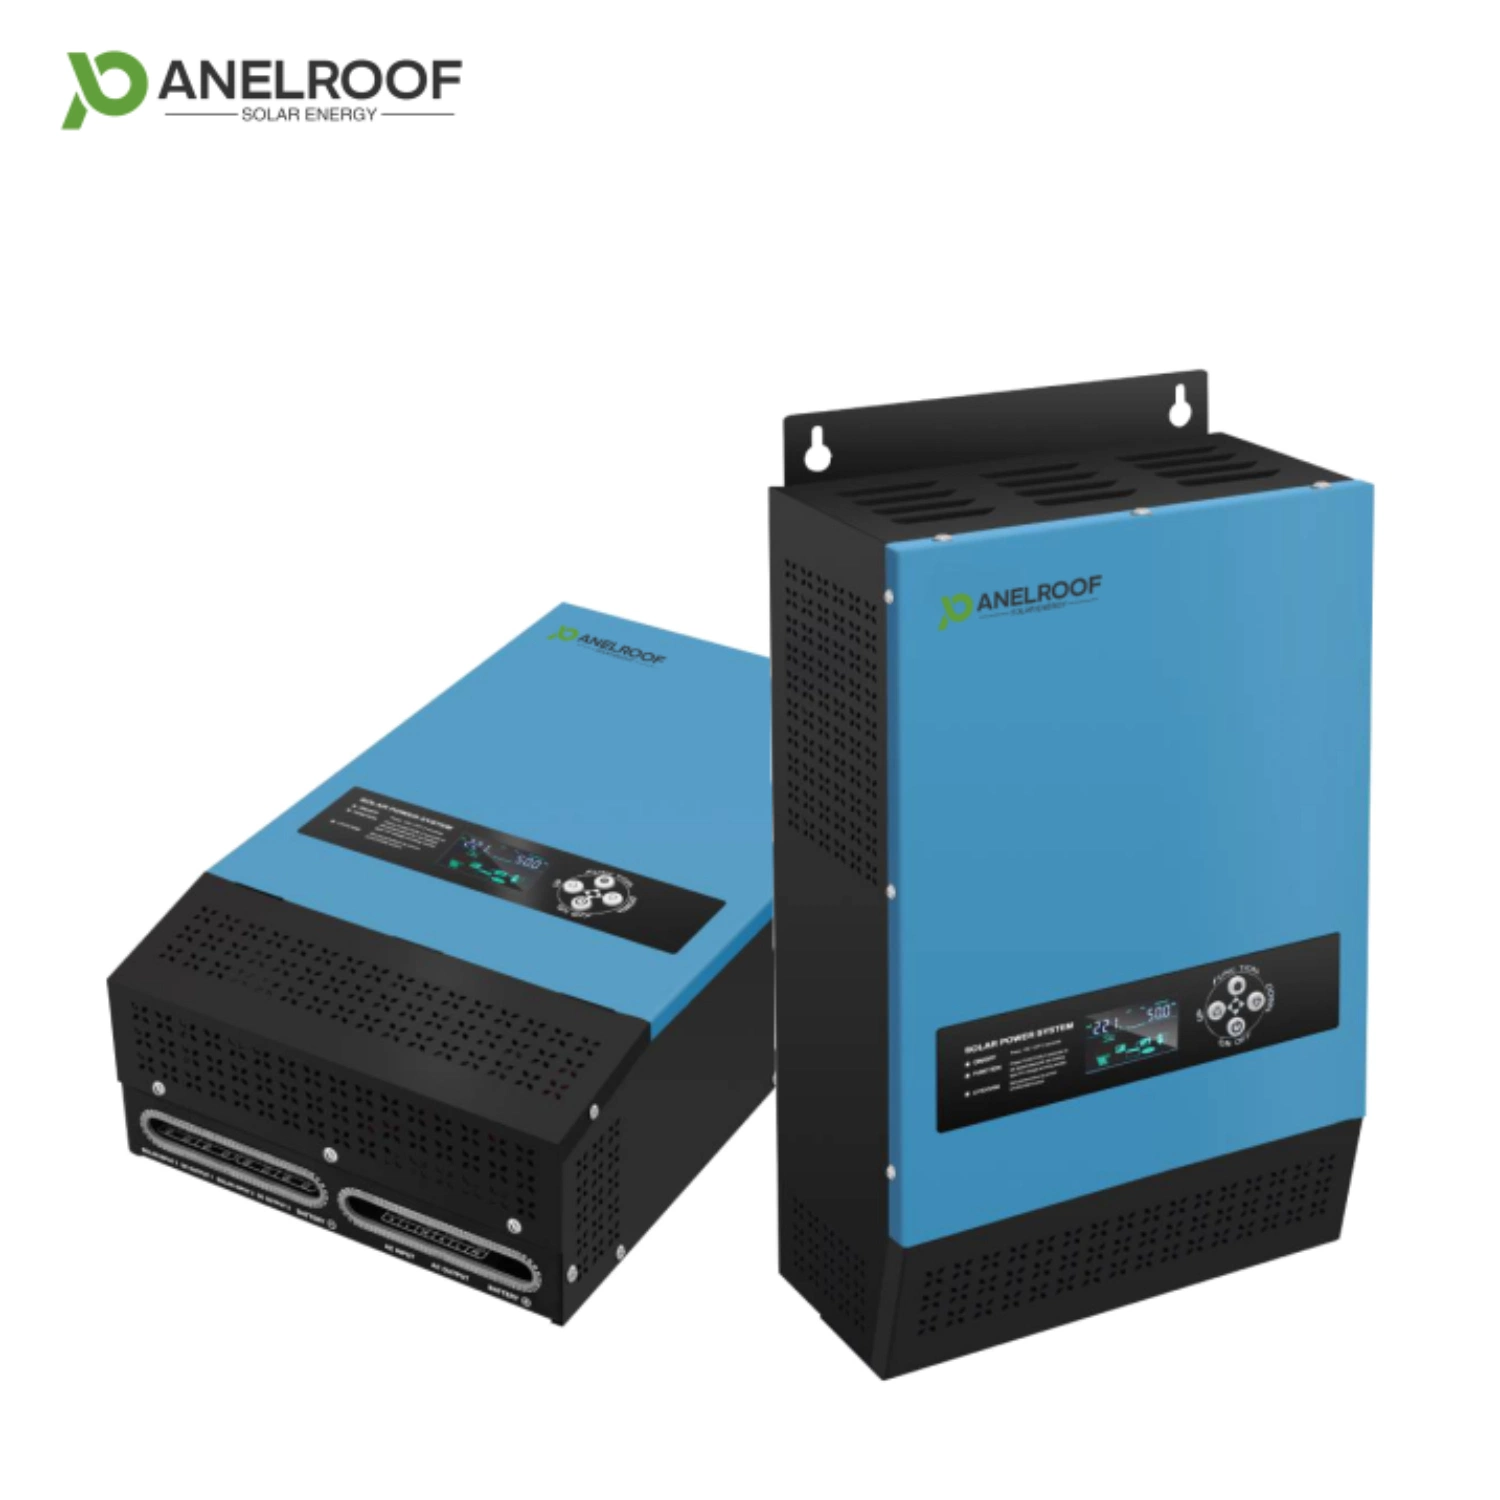 Panelroof 3kw 5kw off Grid Single Phase Photovoltaic Power system Solar Inverter